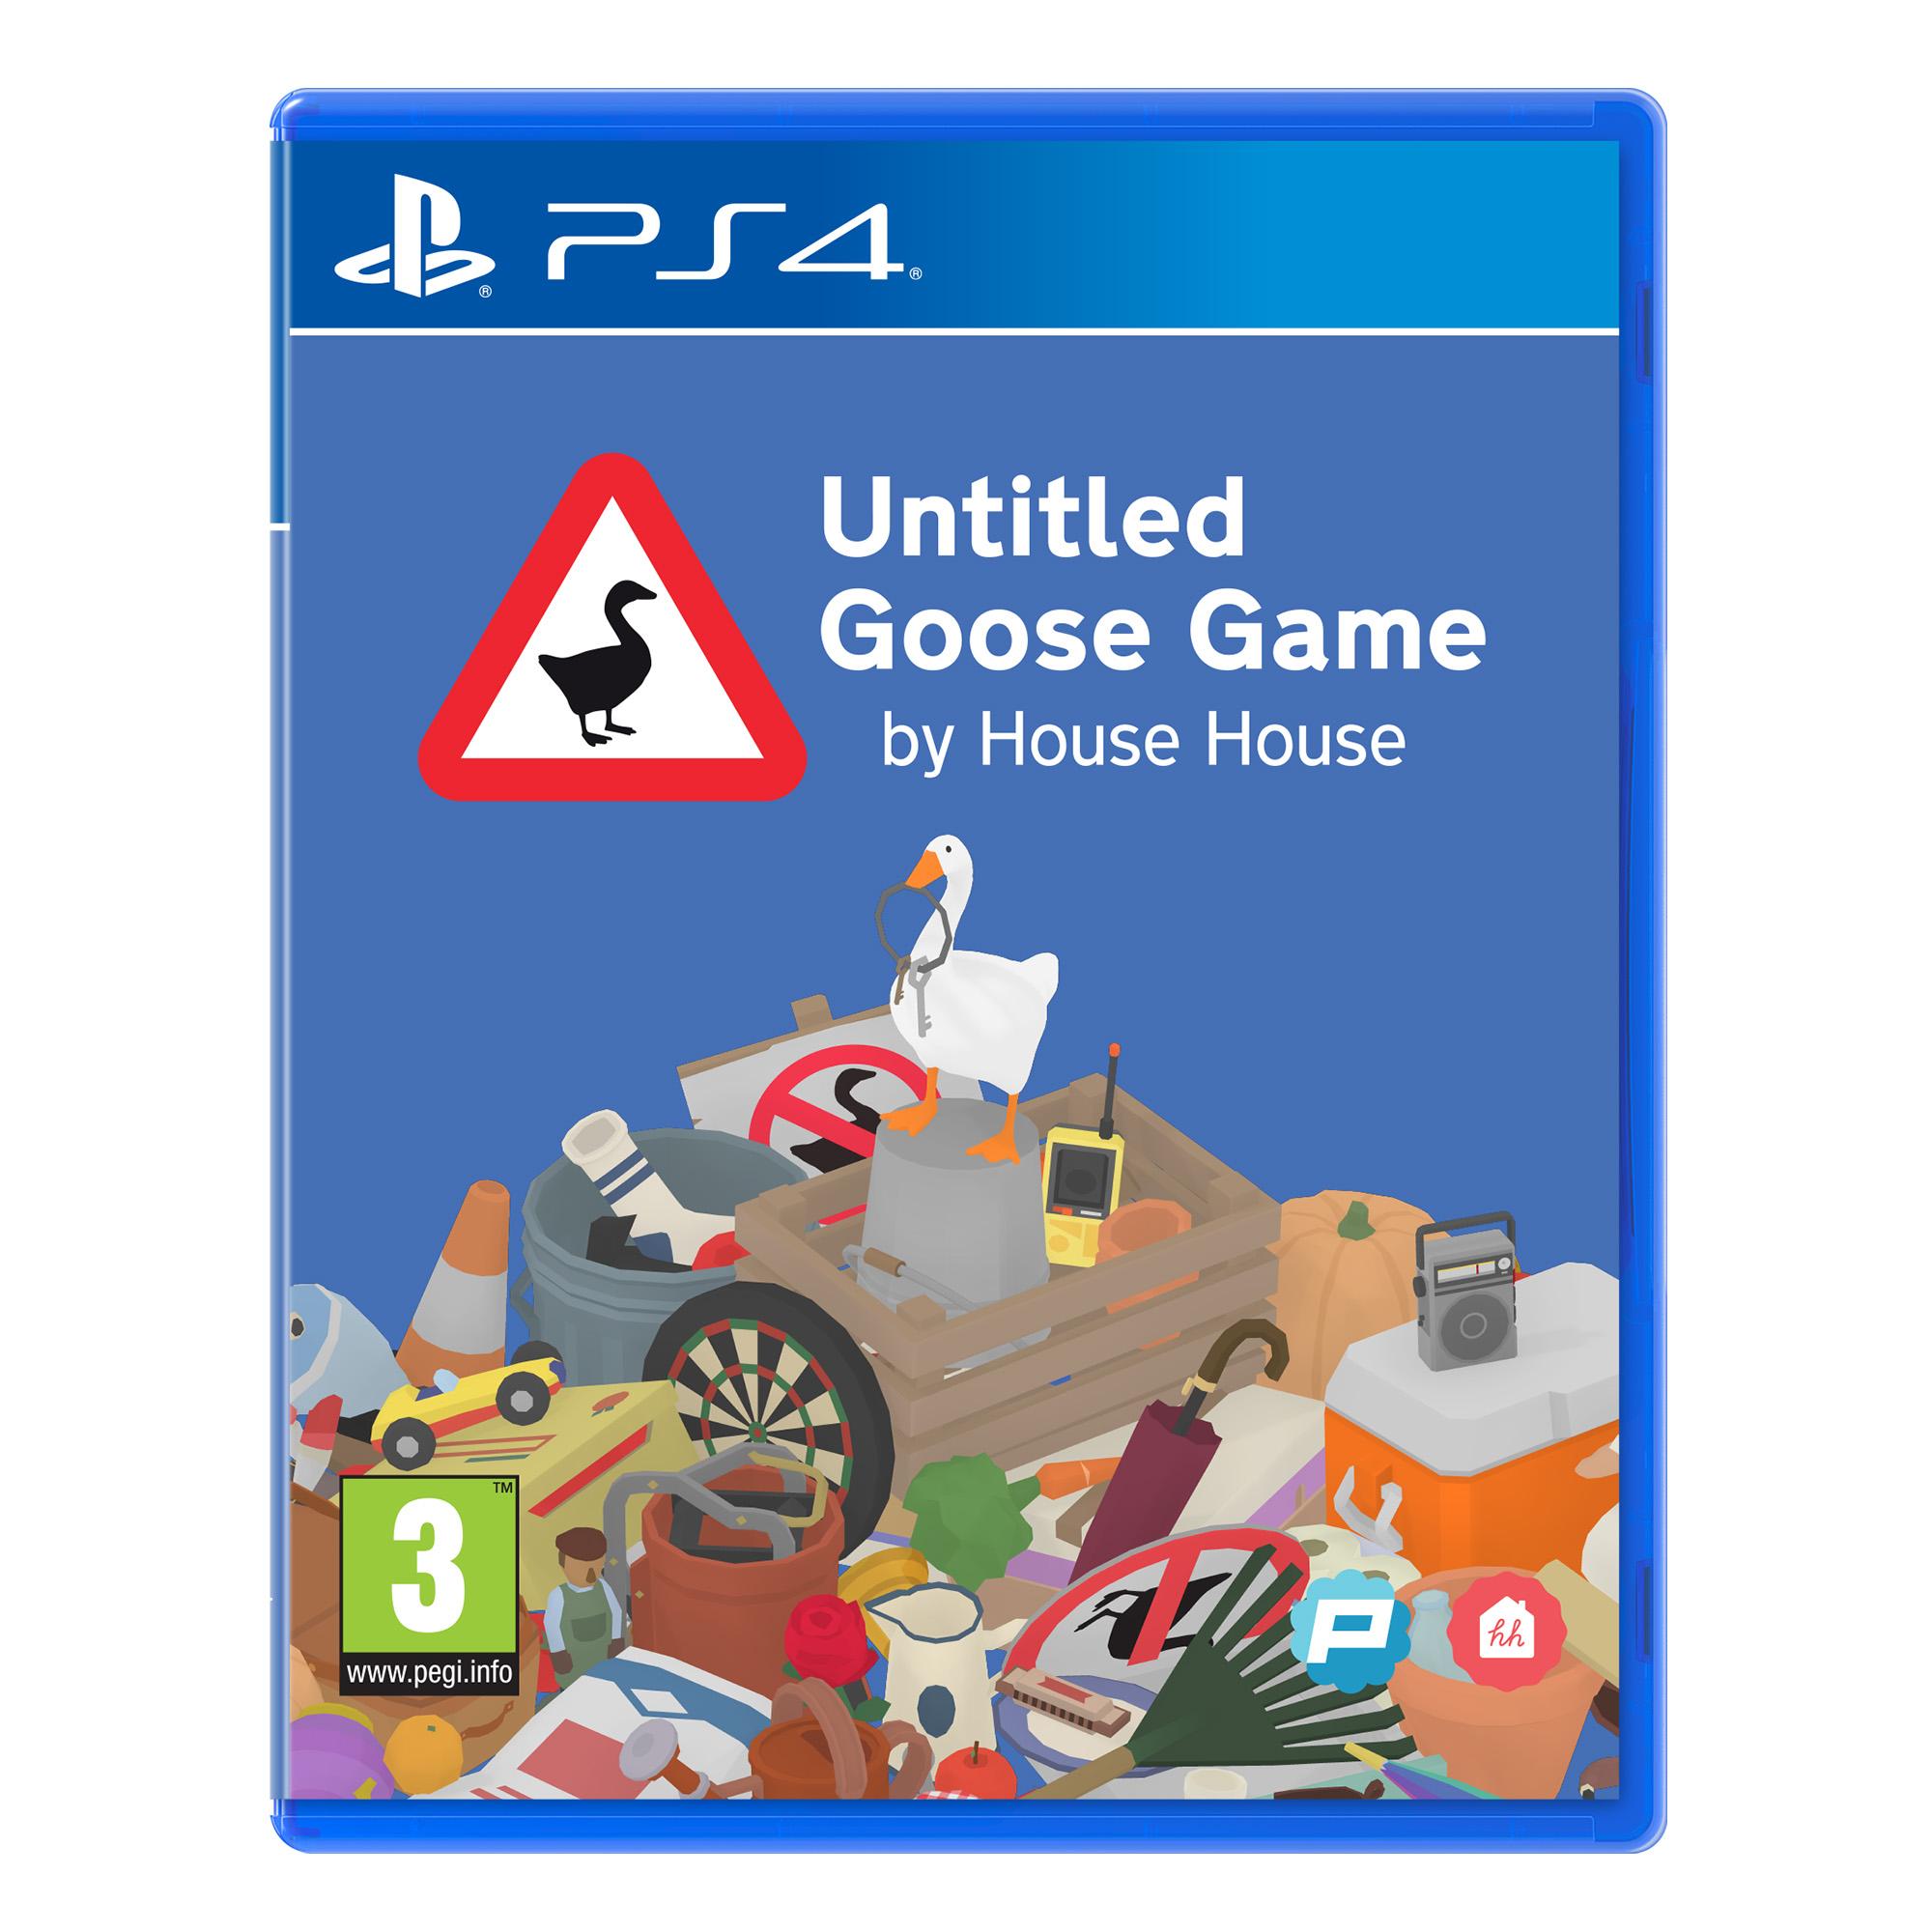 Untitled Goose Game by Baity Rose